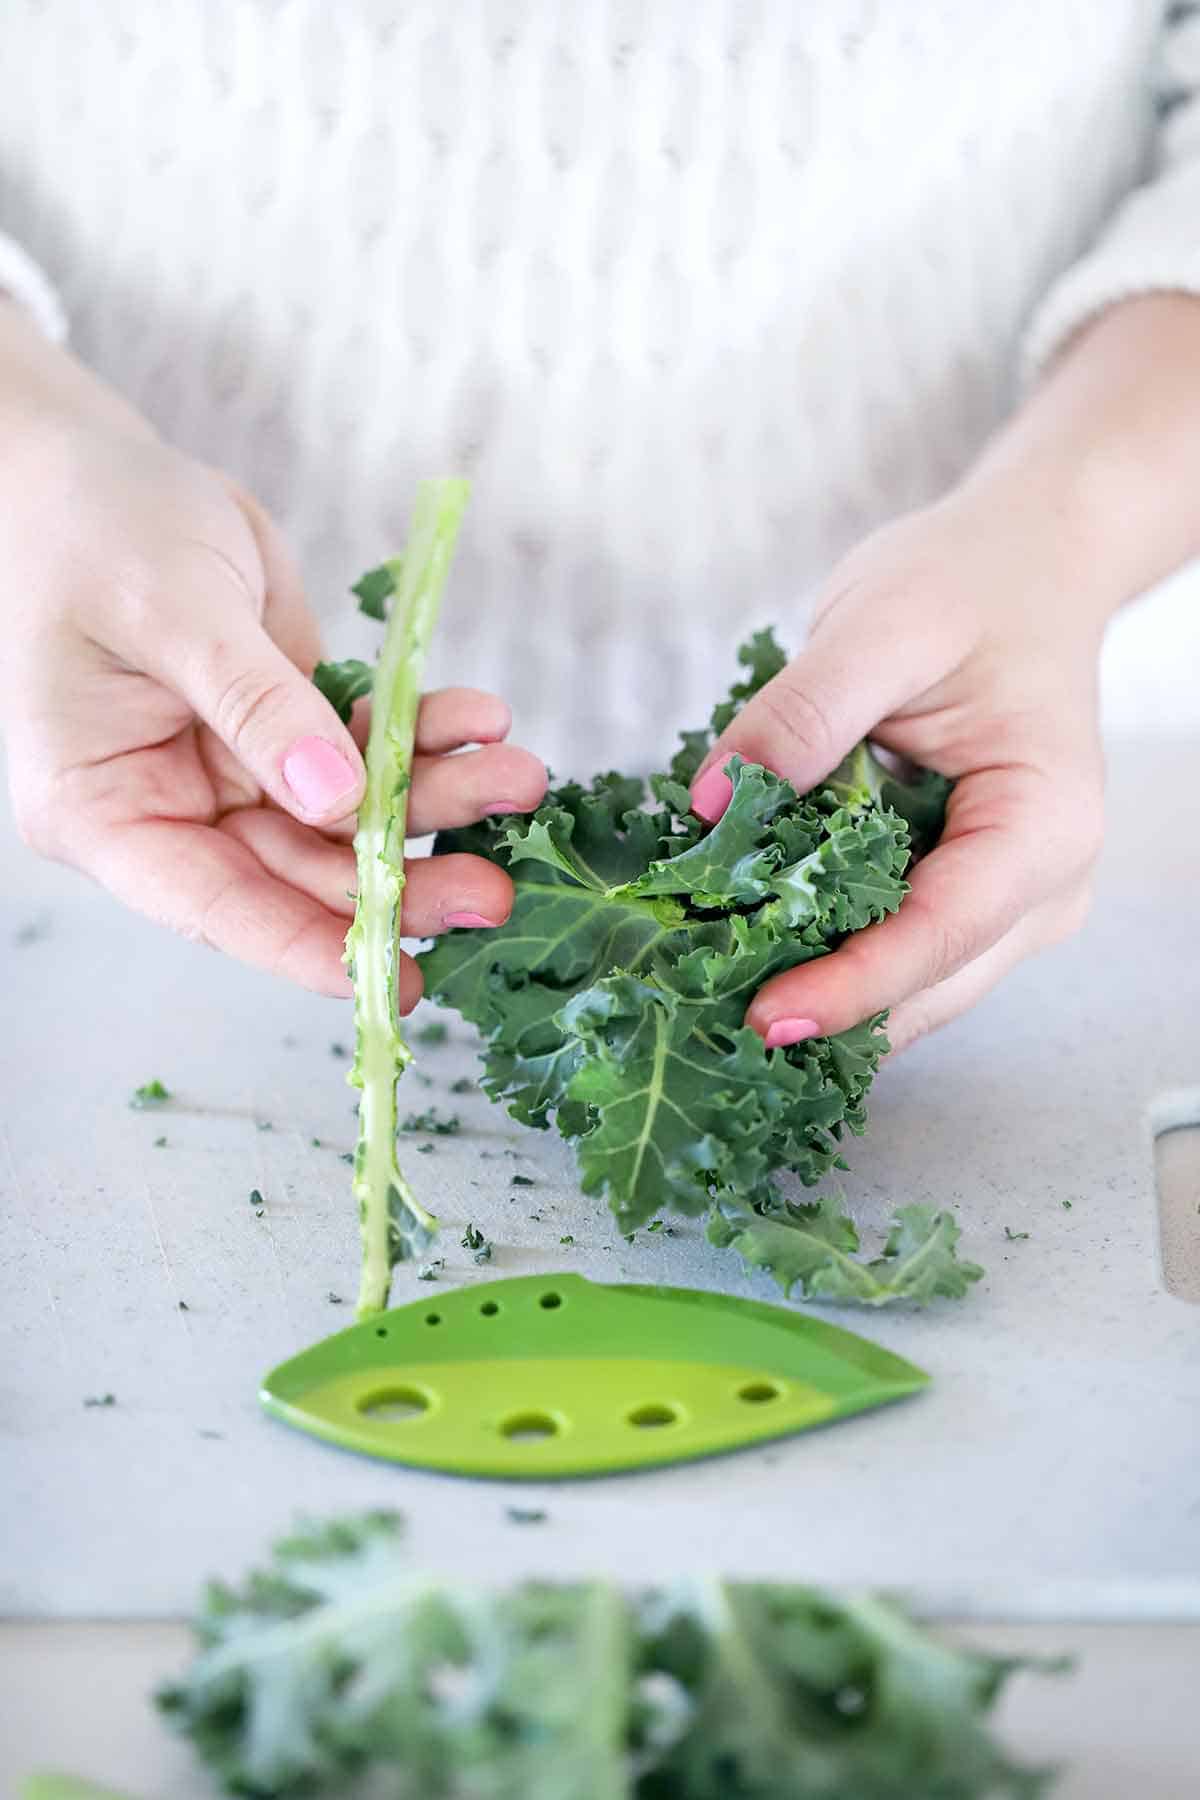 Stem removed from kale leaves with a leaf stripper.